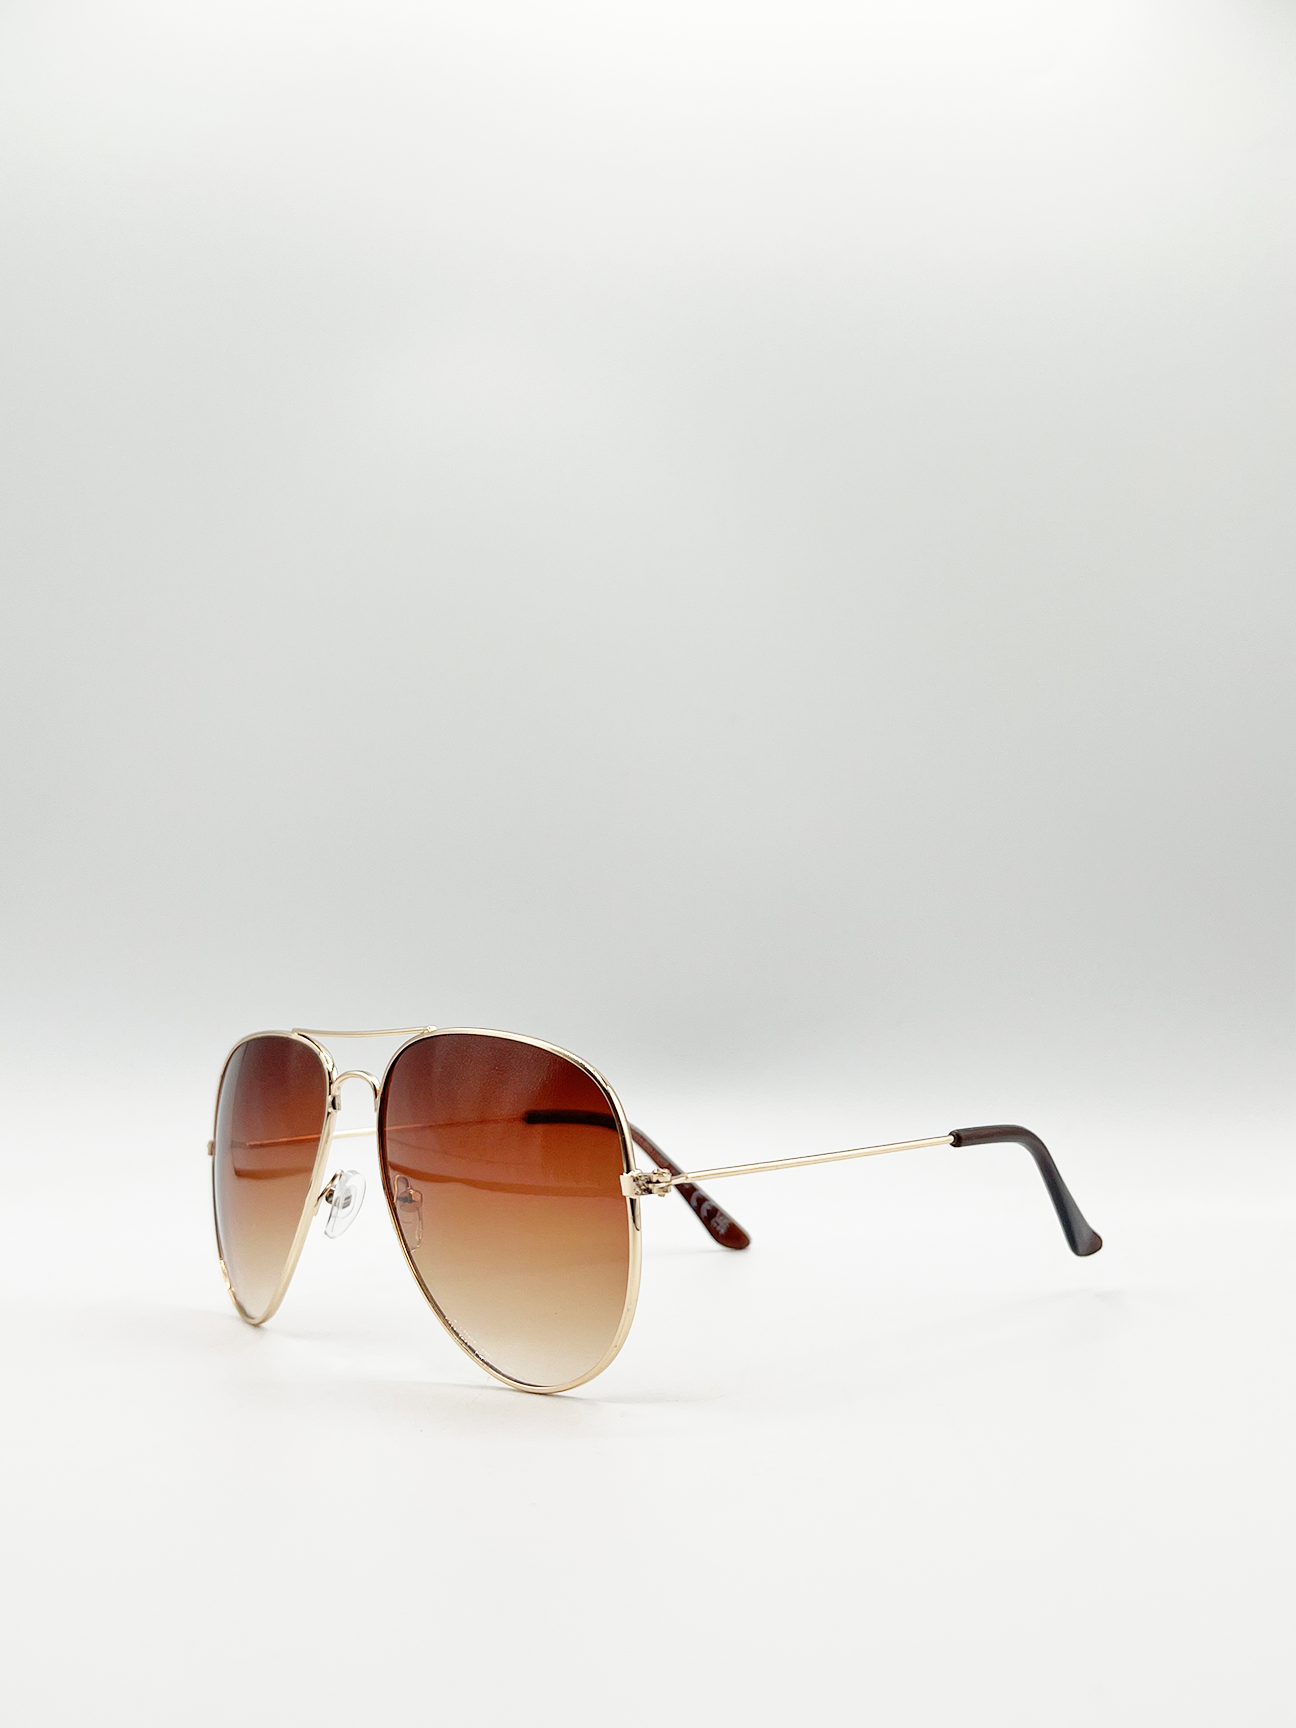 Gold Aviator Sunglasses with Brown Lenses